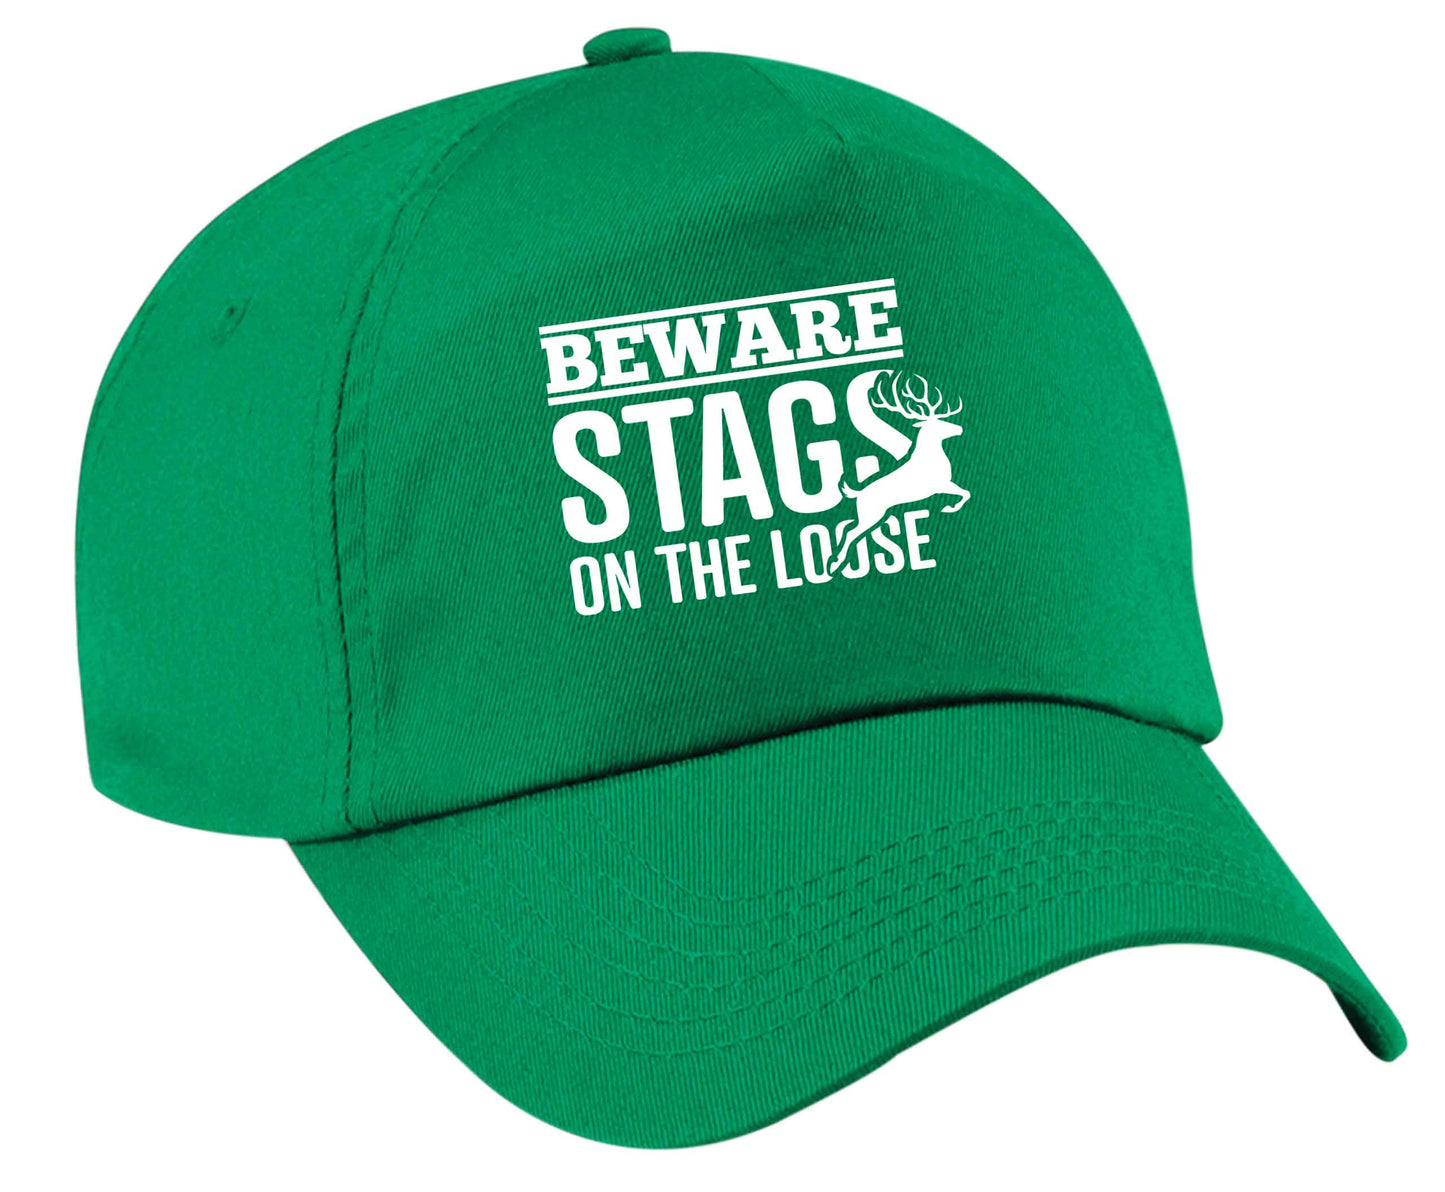 Beware stags on the loose | Baseball Cap